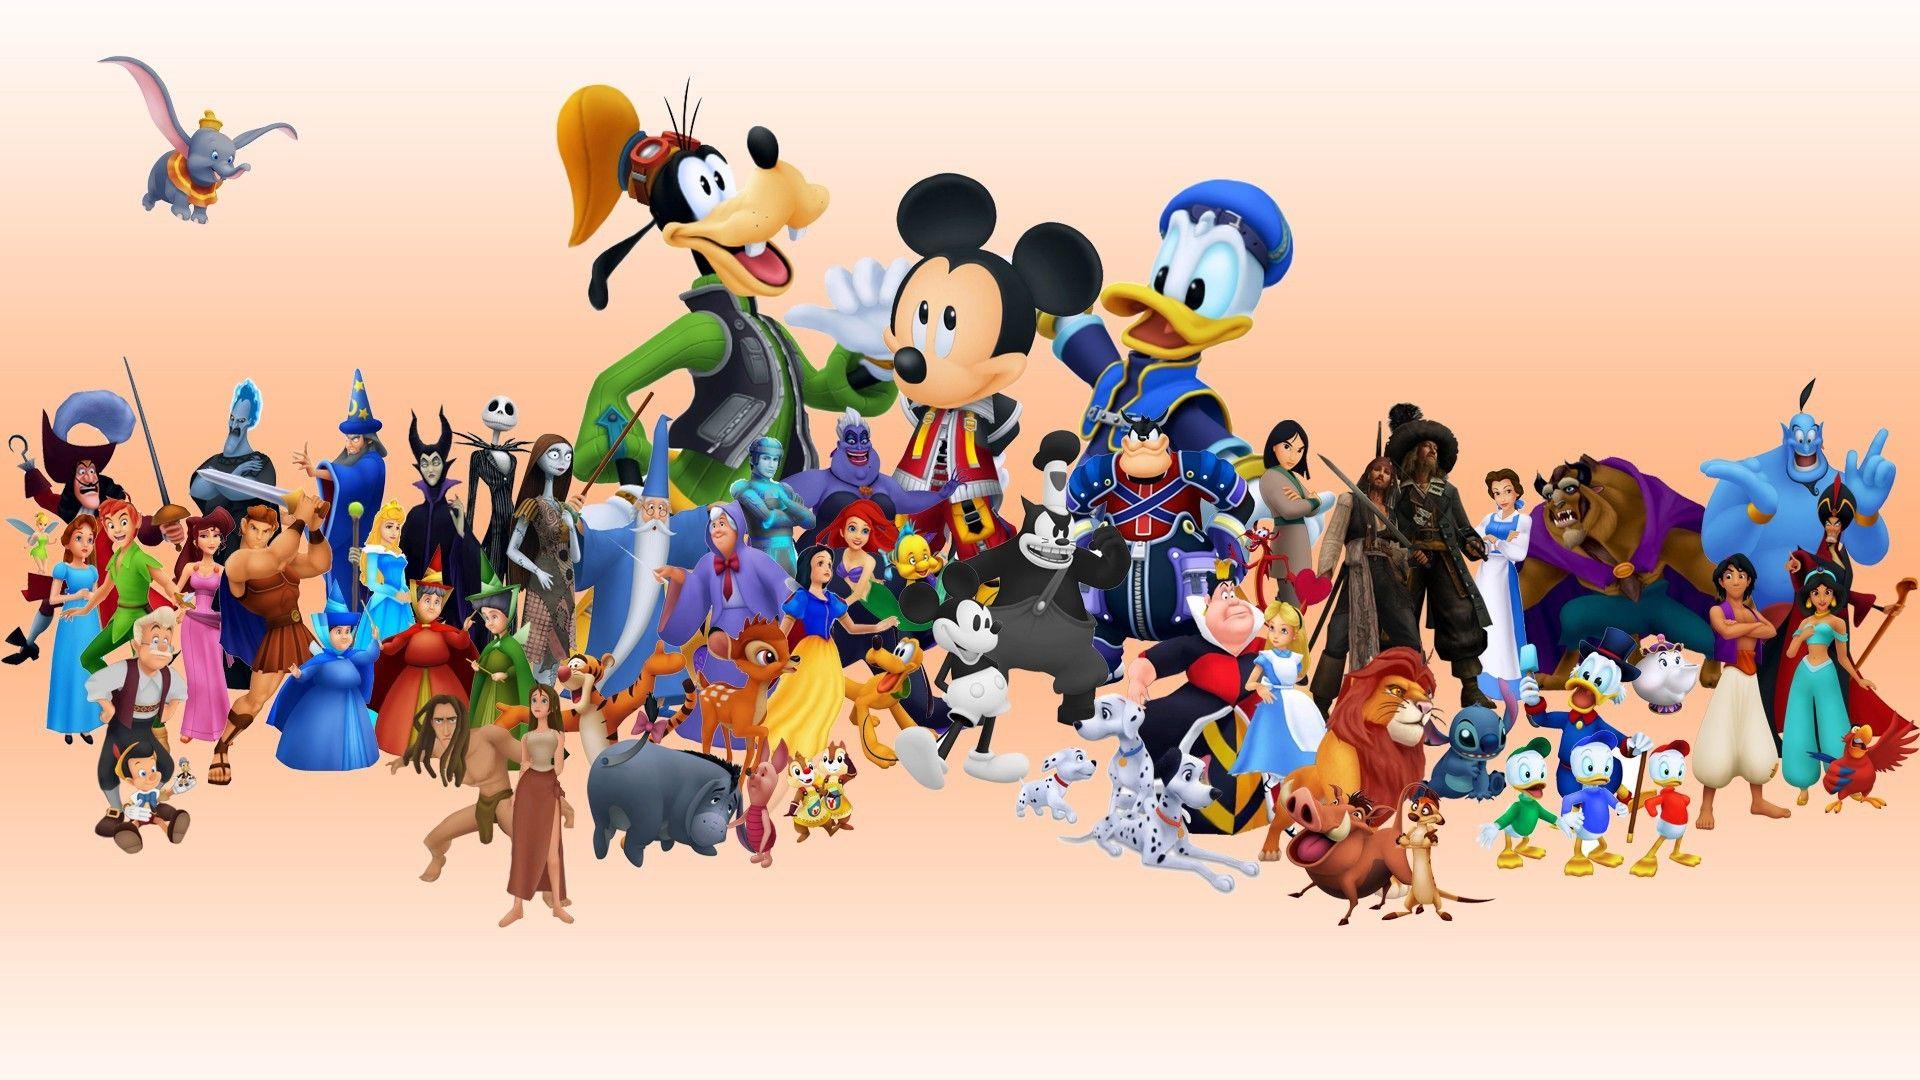 Wallpaper, people, illustration, Mickey Mouse, Donald Duck, Goofy